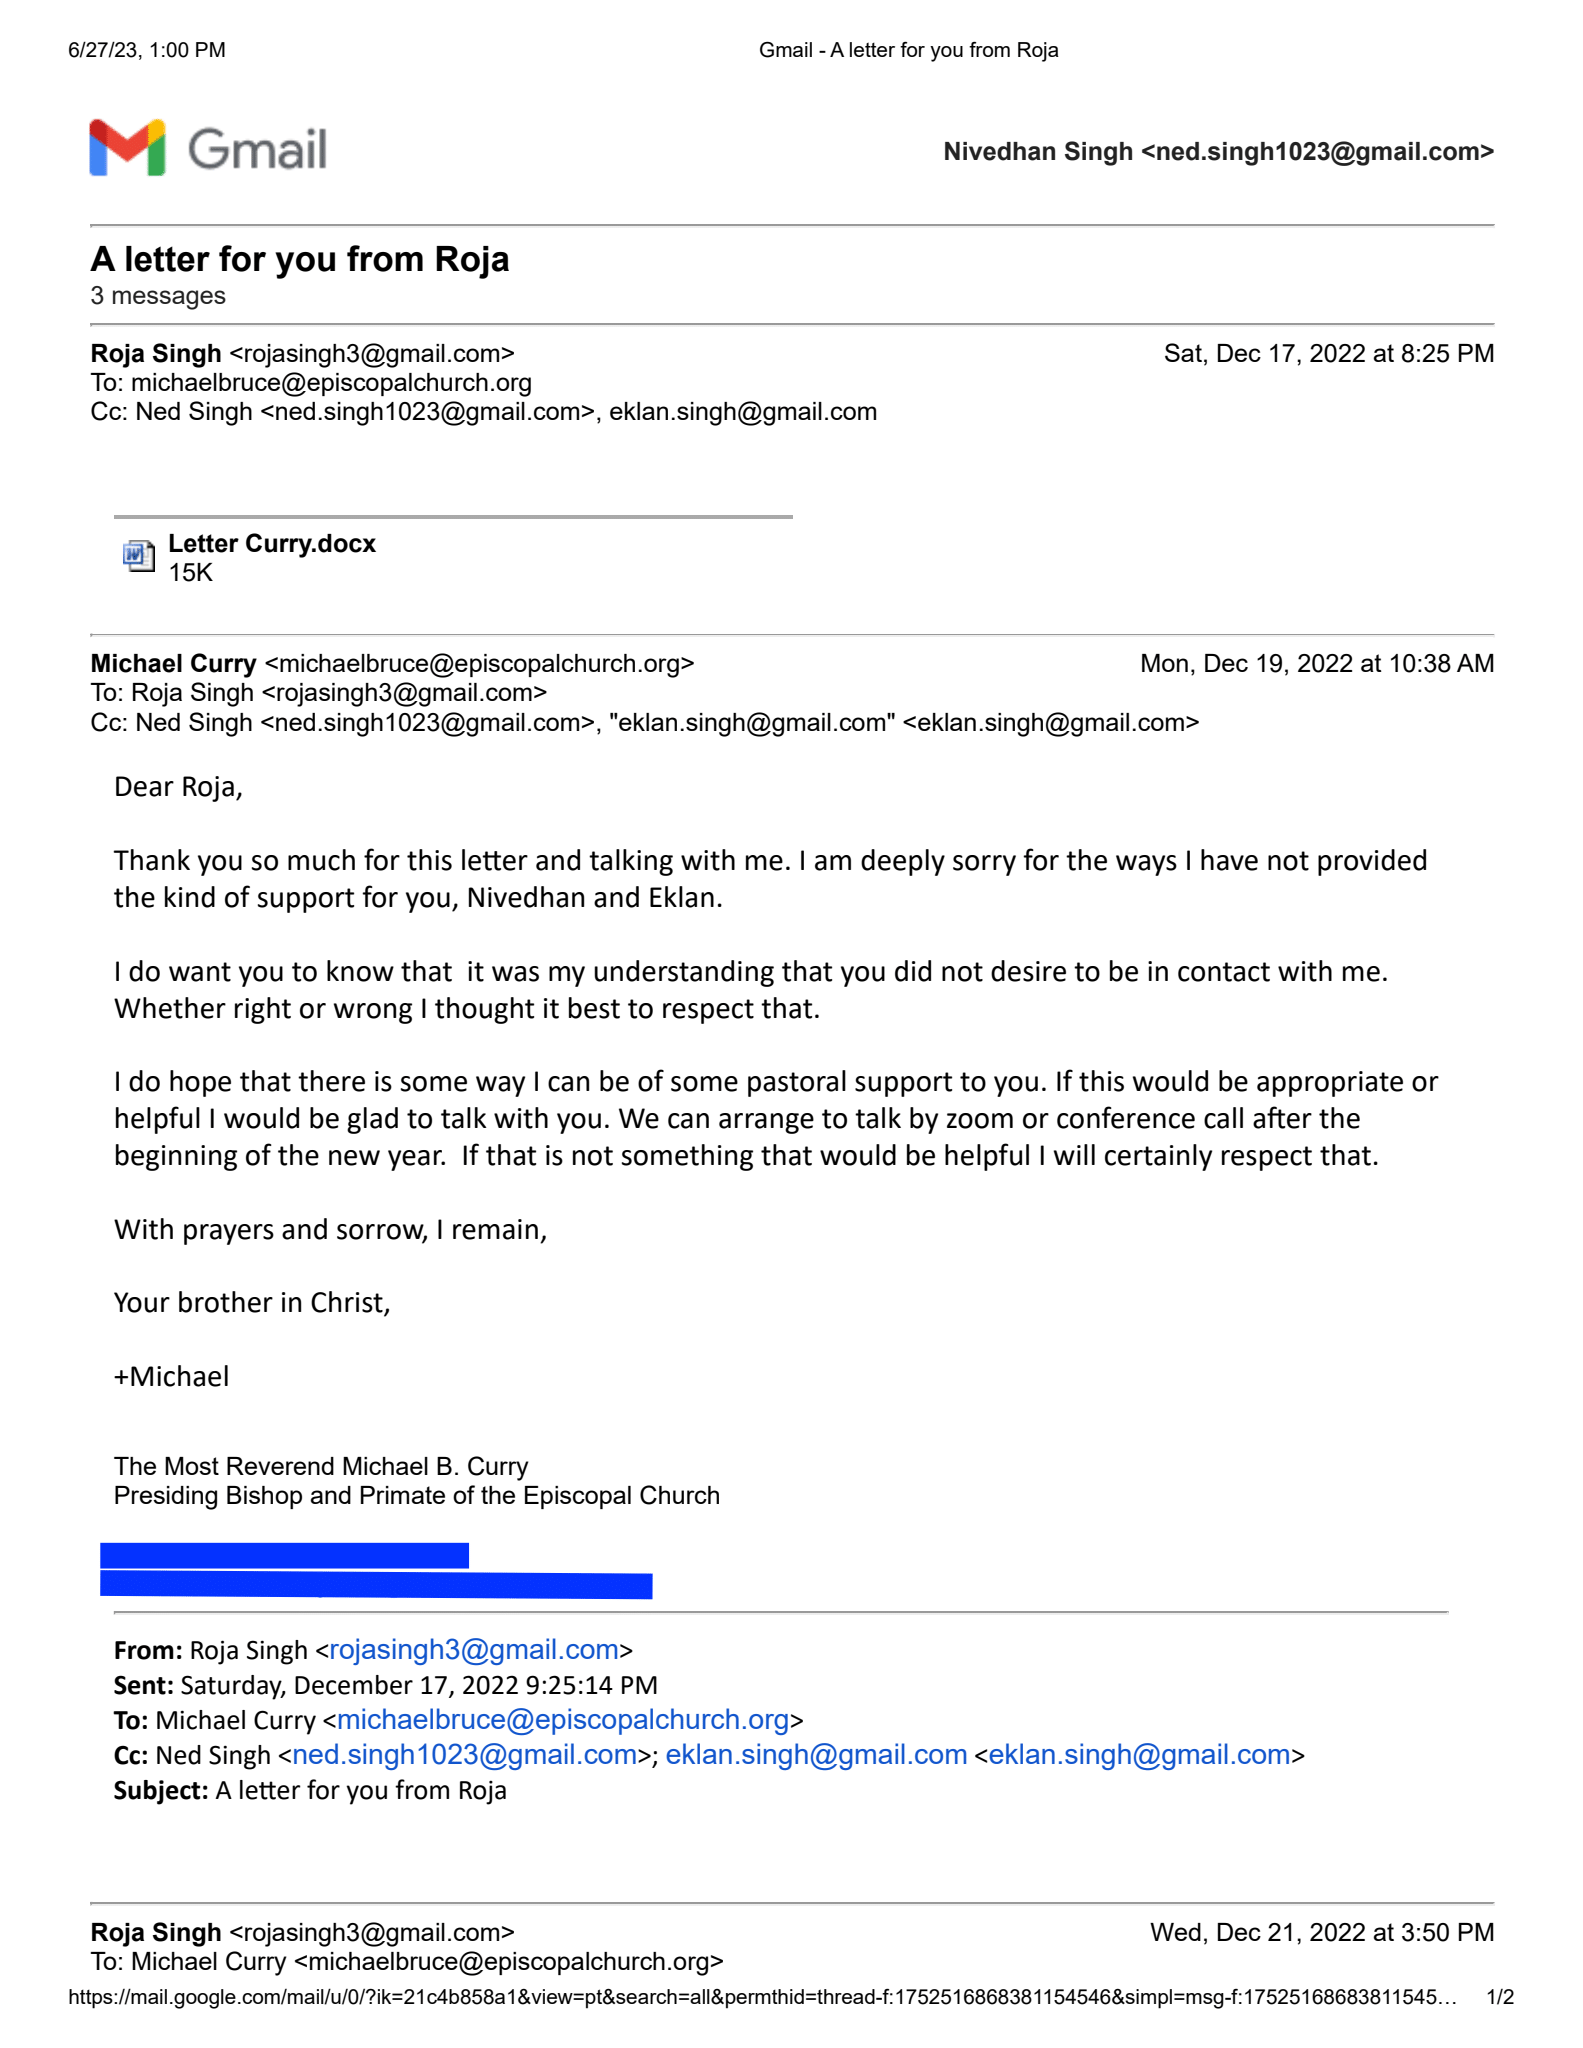 Email exchange - Page 1